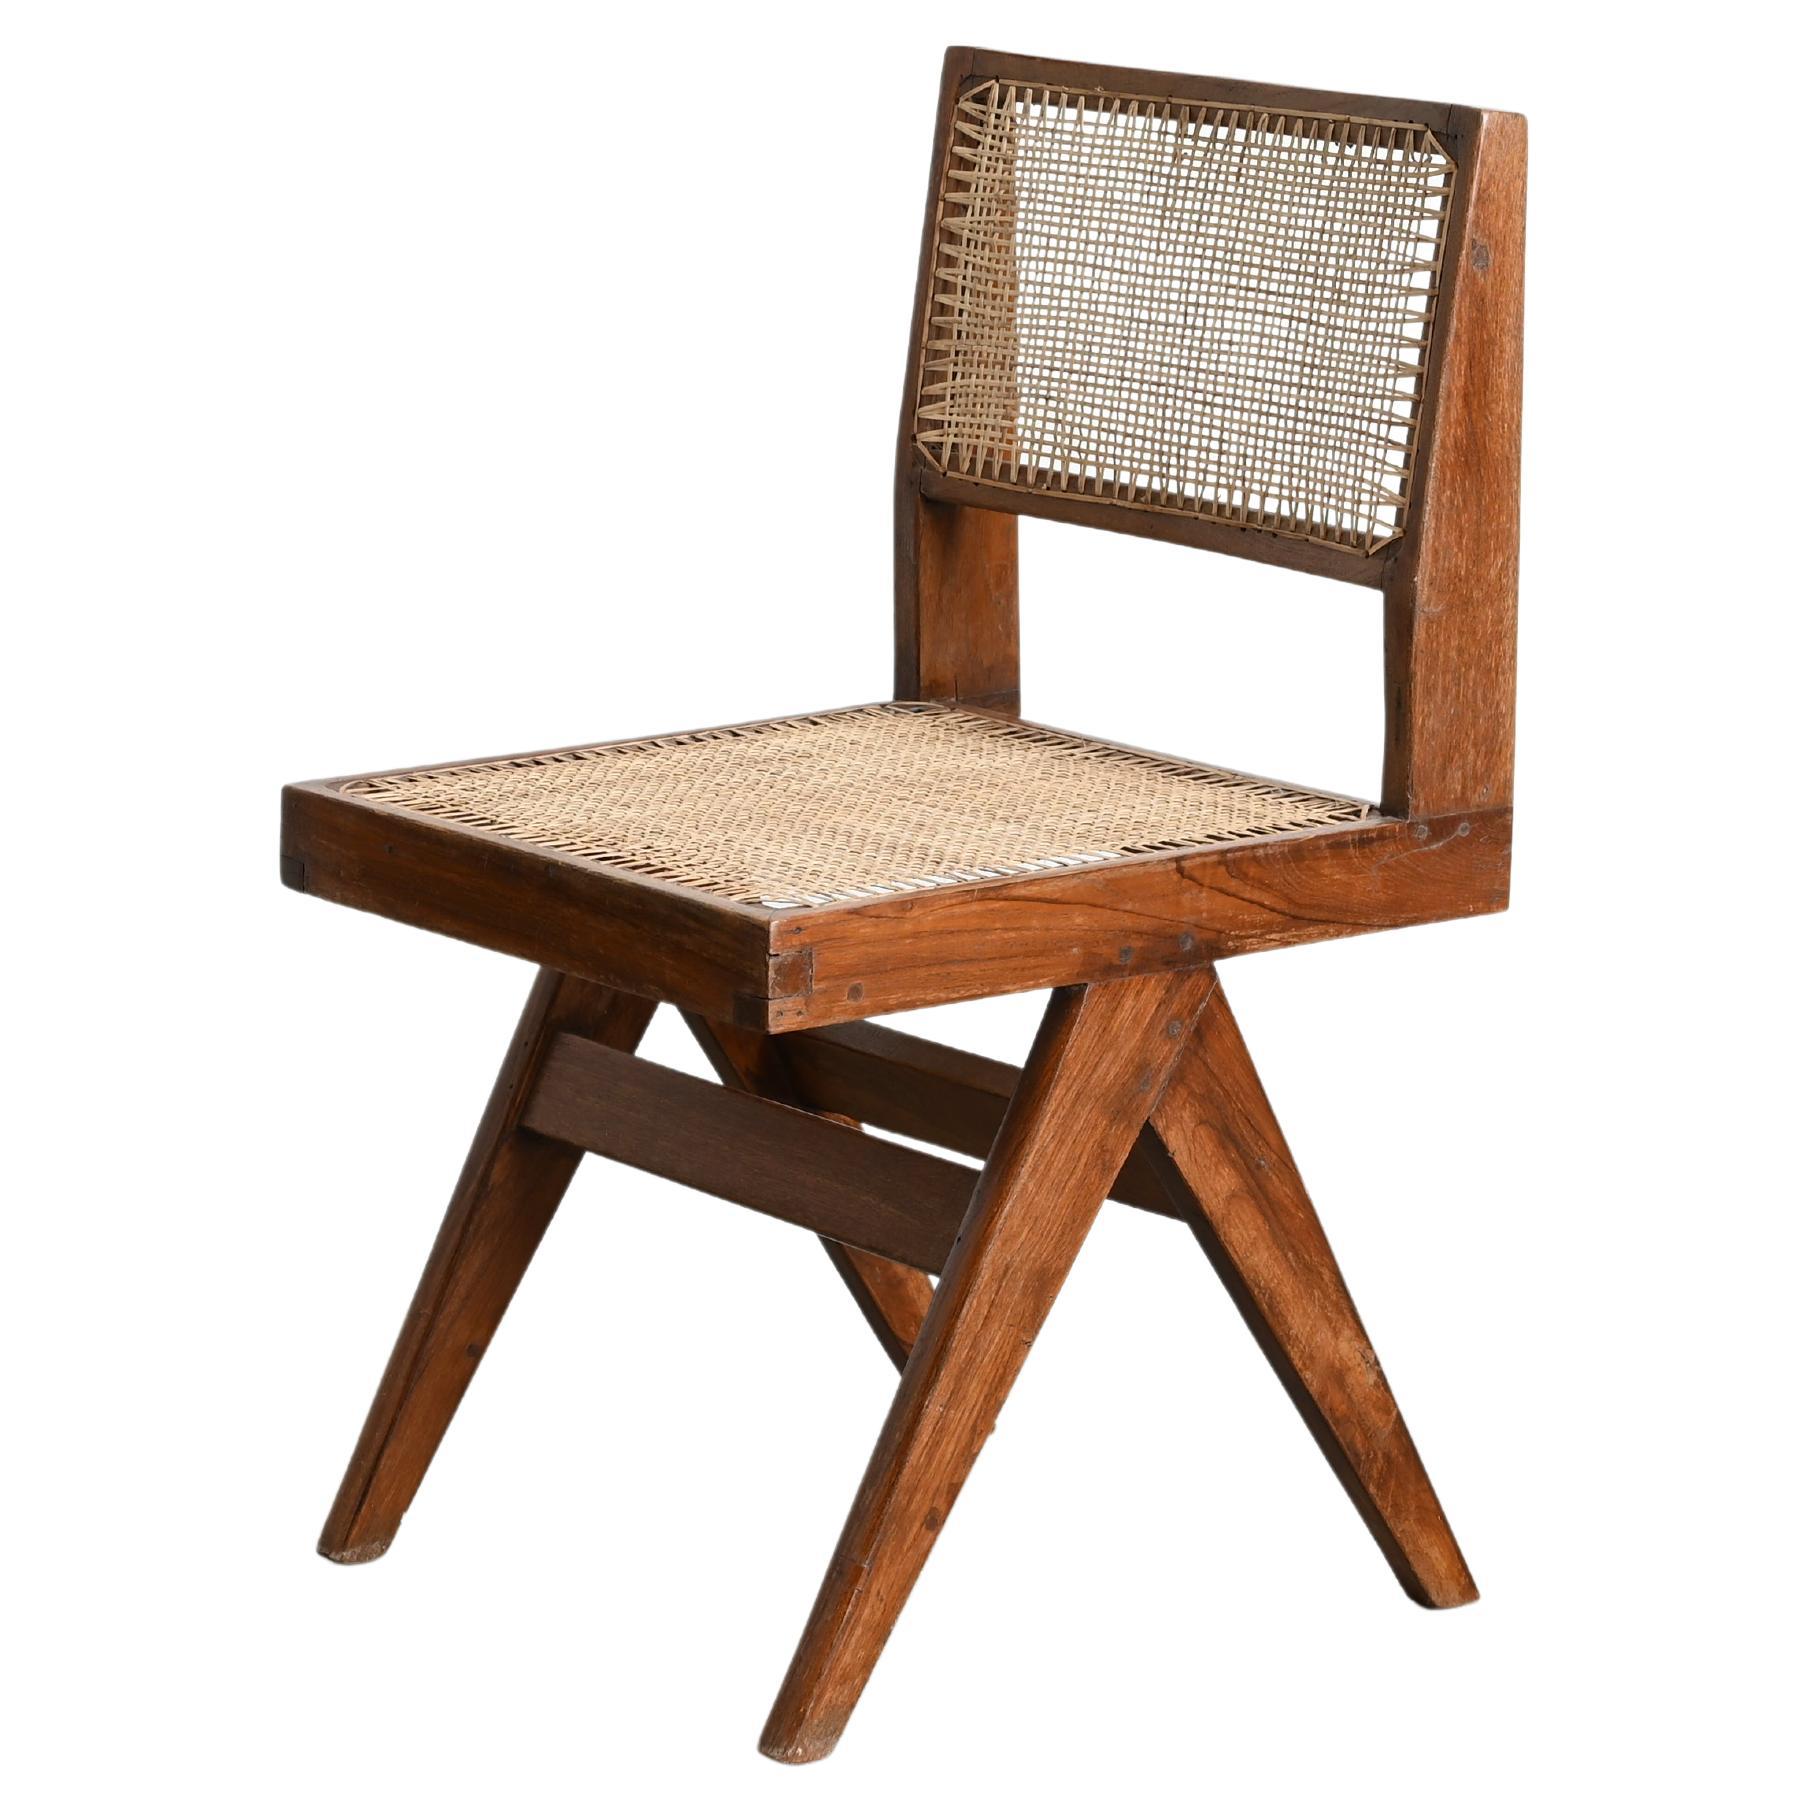 Pierre Jeanneret PJ-SI-25-A Chair / Authentic Mid-Century Modern Chandigarh